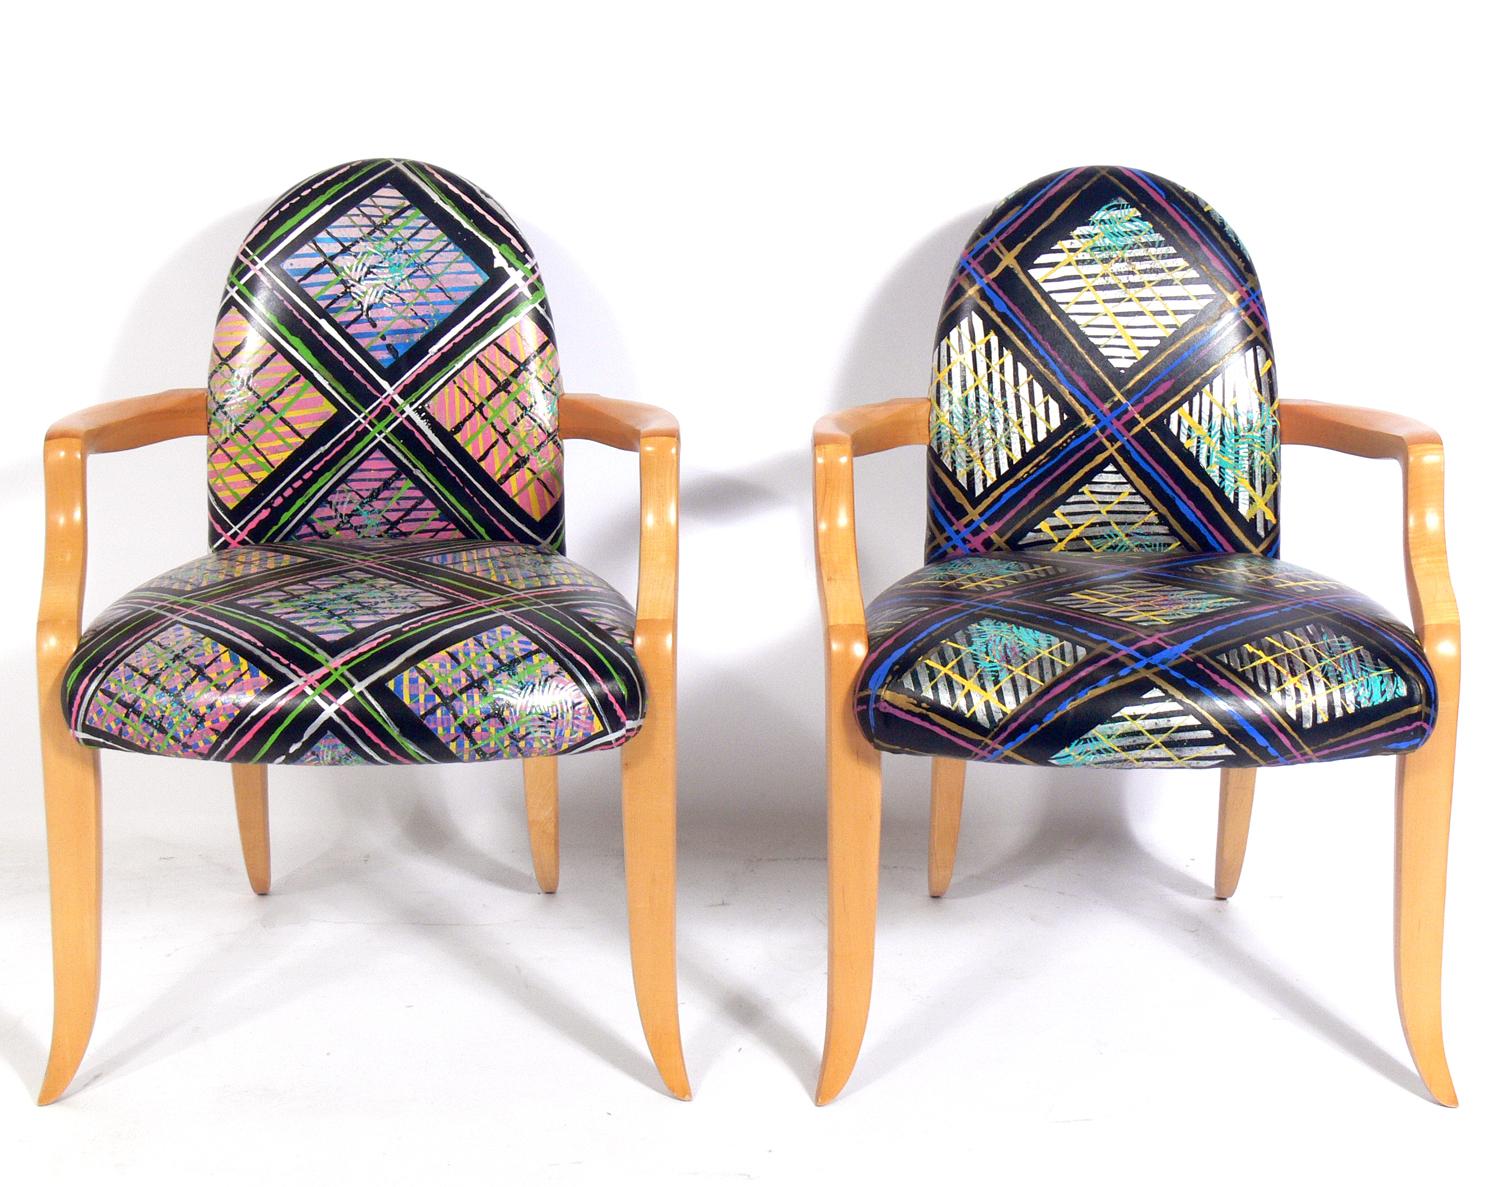 Pair of armchairs, designed by Wendell Castle for Dennis Miller Associates, American, circa 1990s. These chairs retain their original hand-painted leather upholstery.